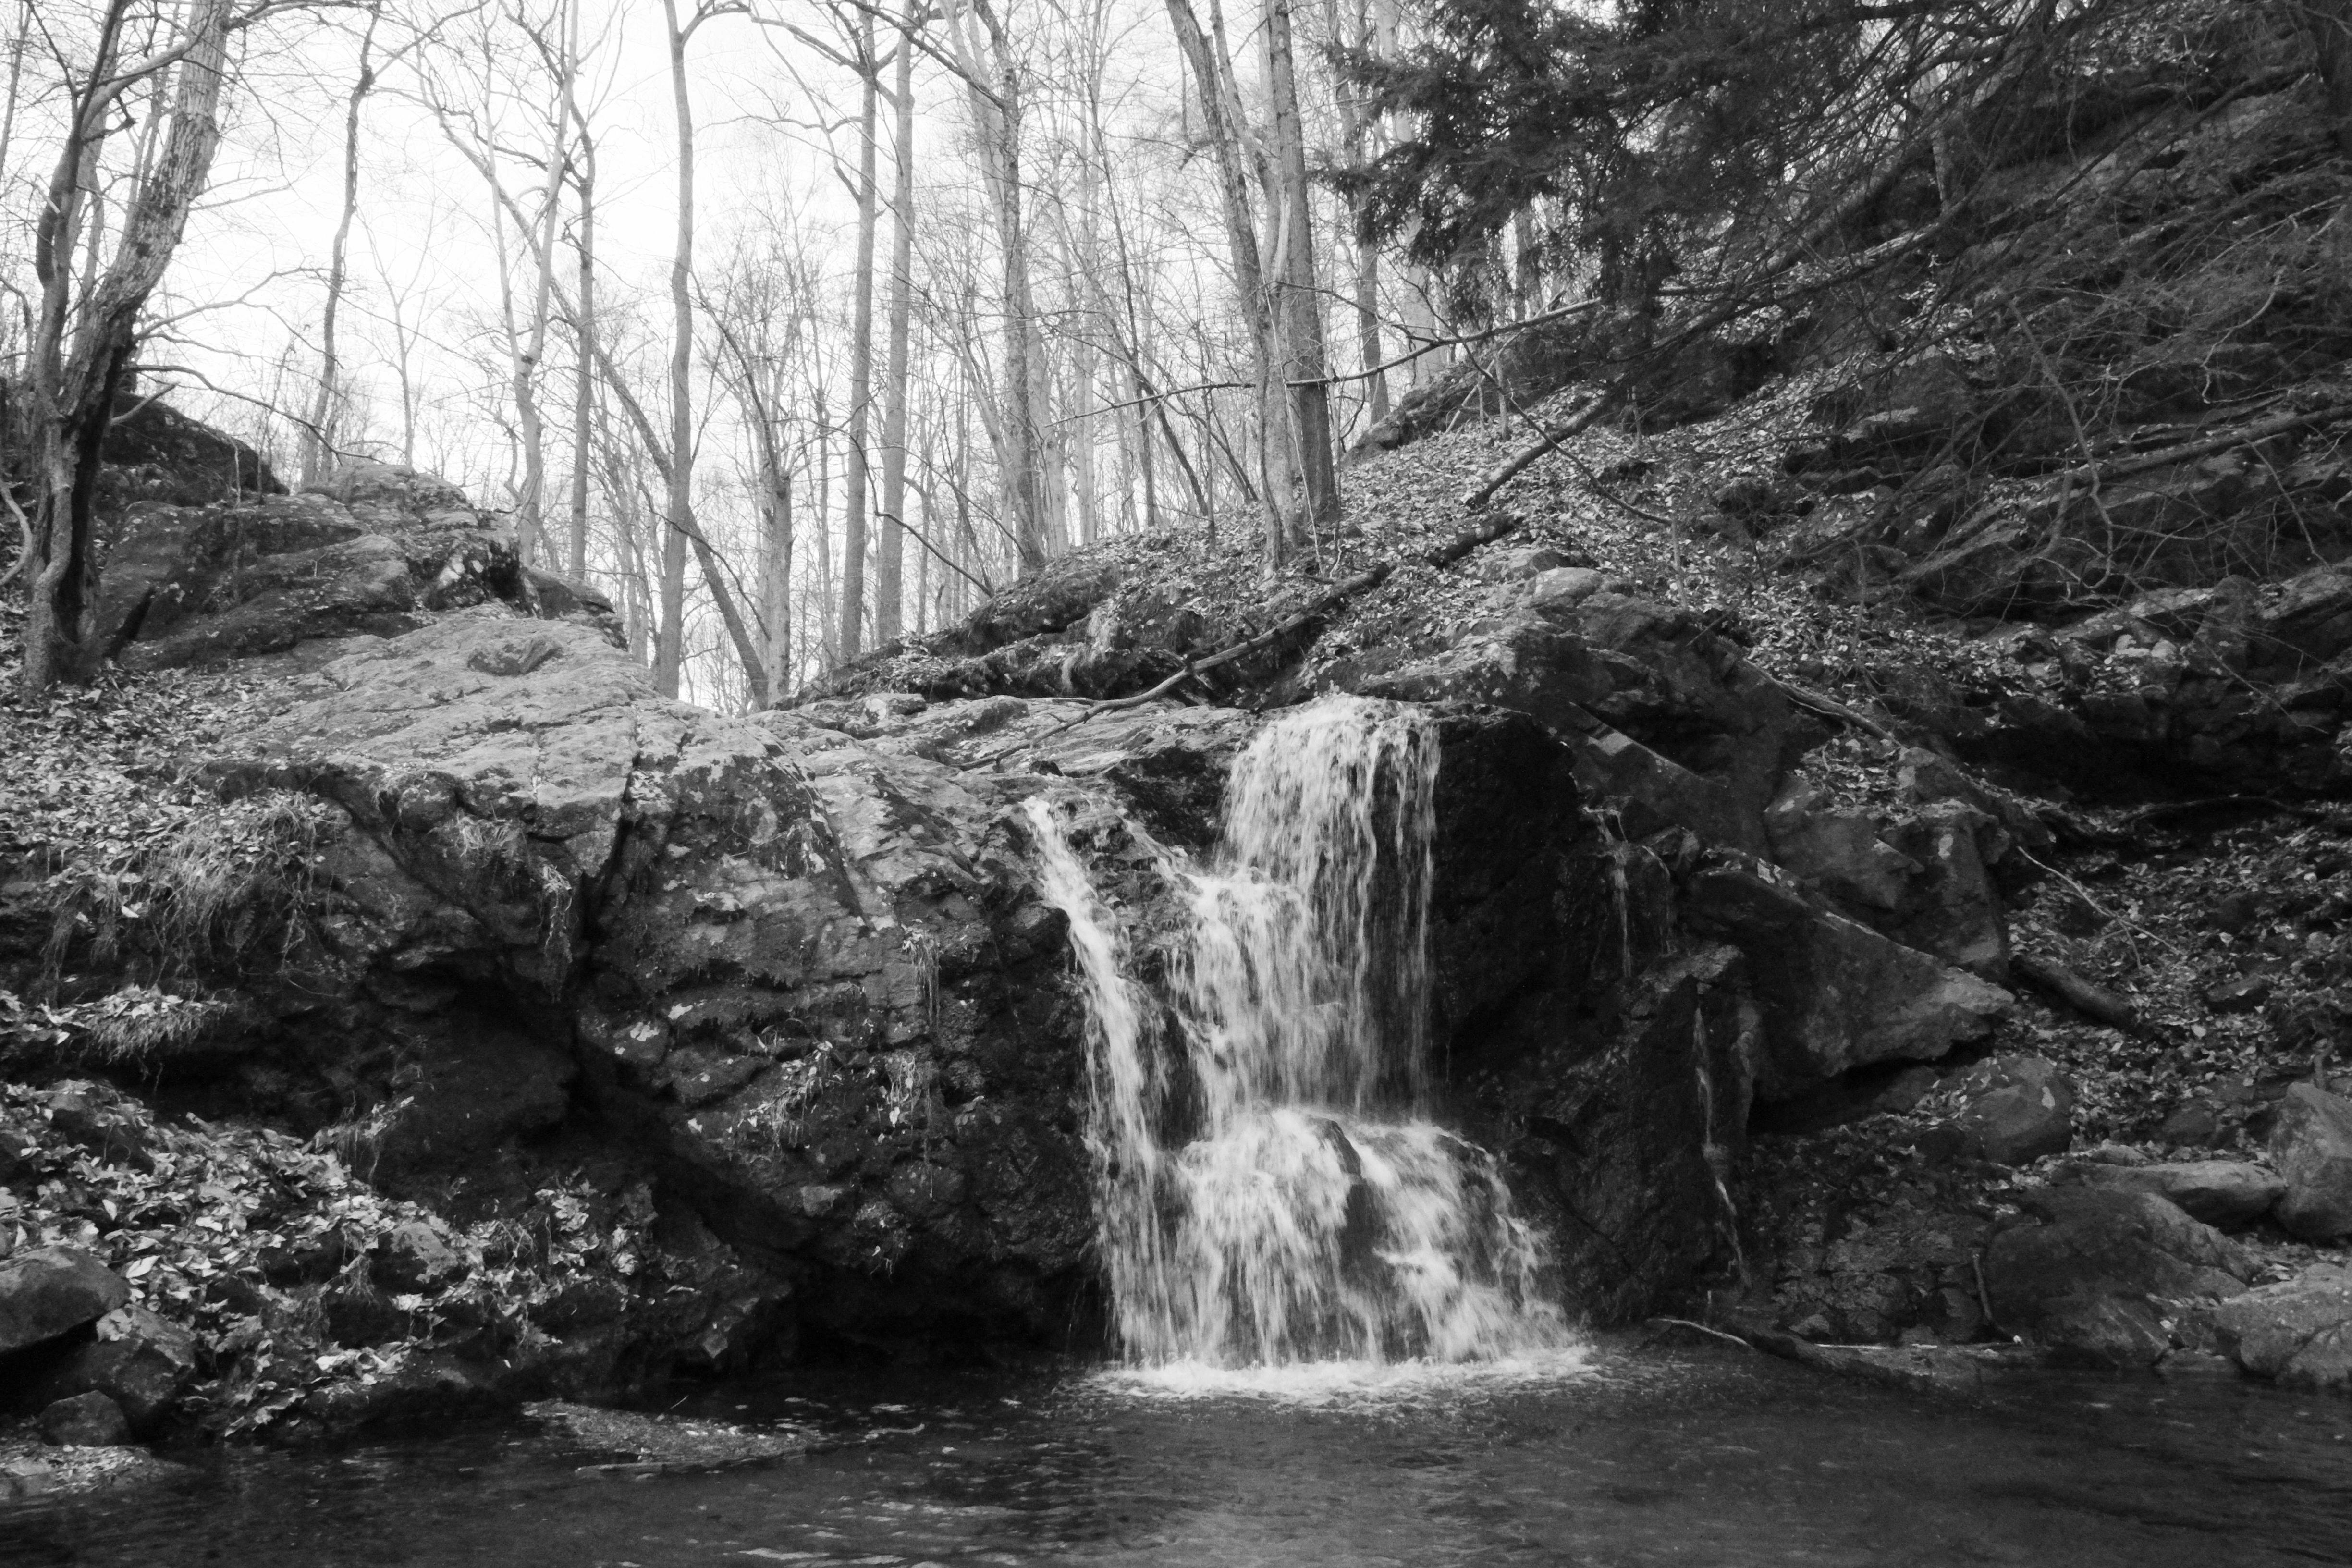 The base of Cascade Falls in Patapsco State Park in Maryland. A waterfall spills down rock formations into a pool below.